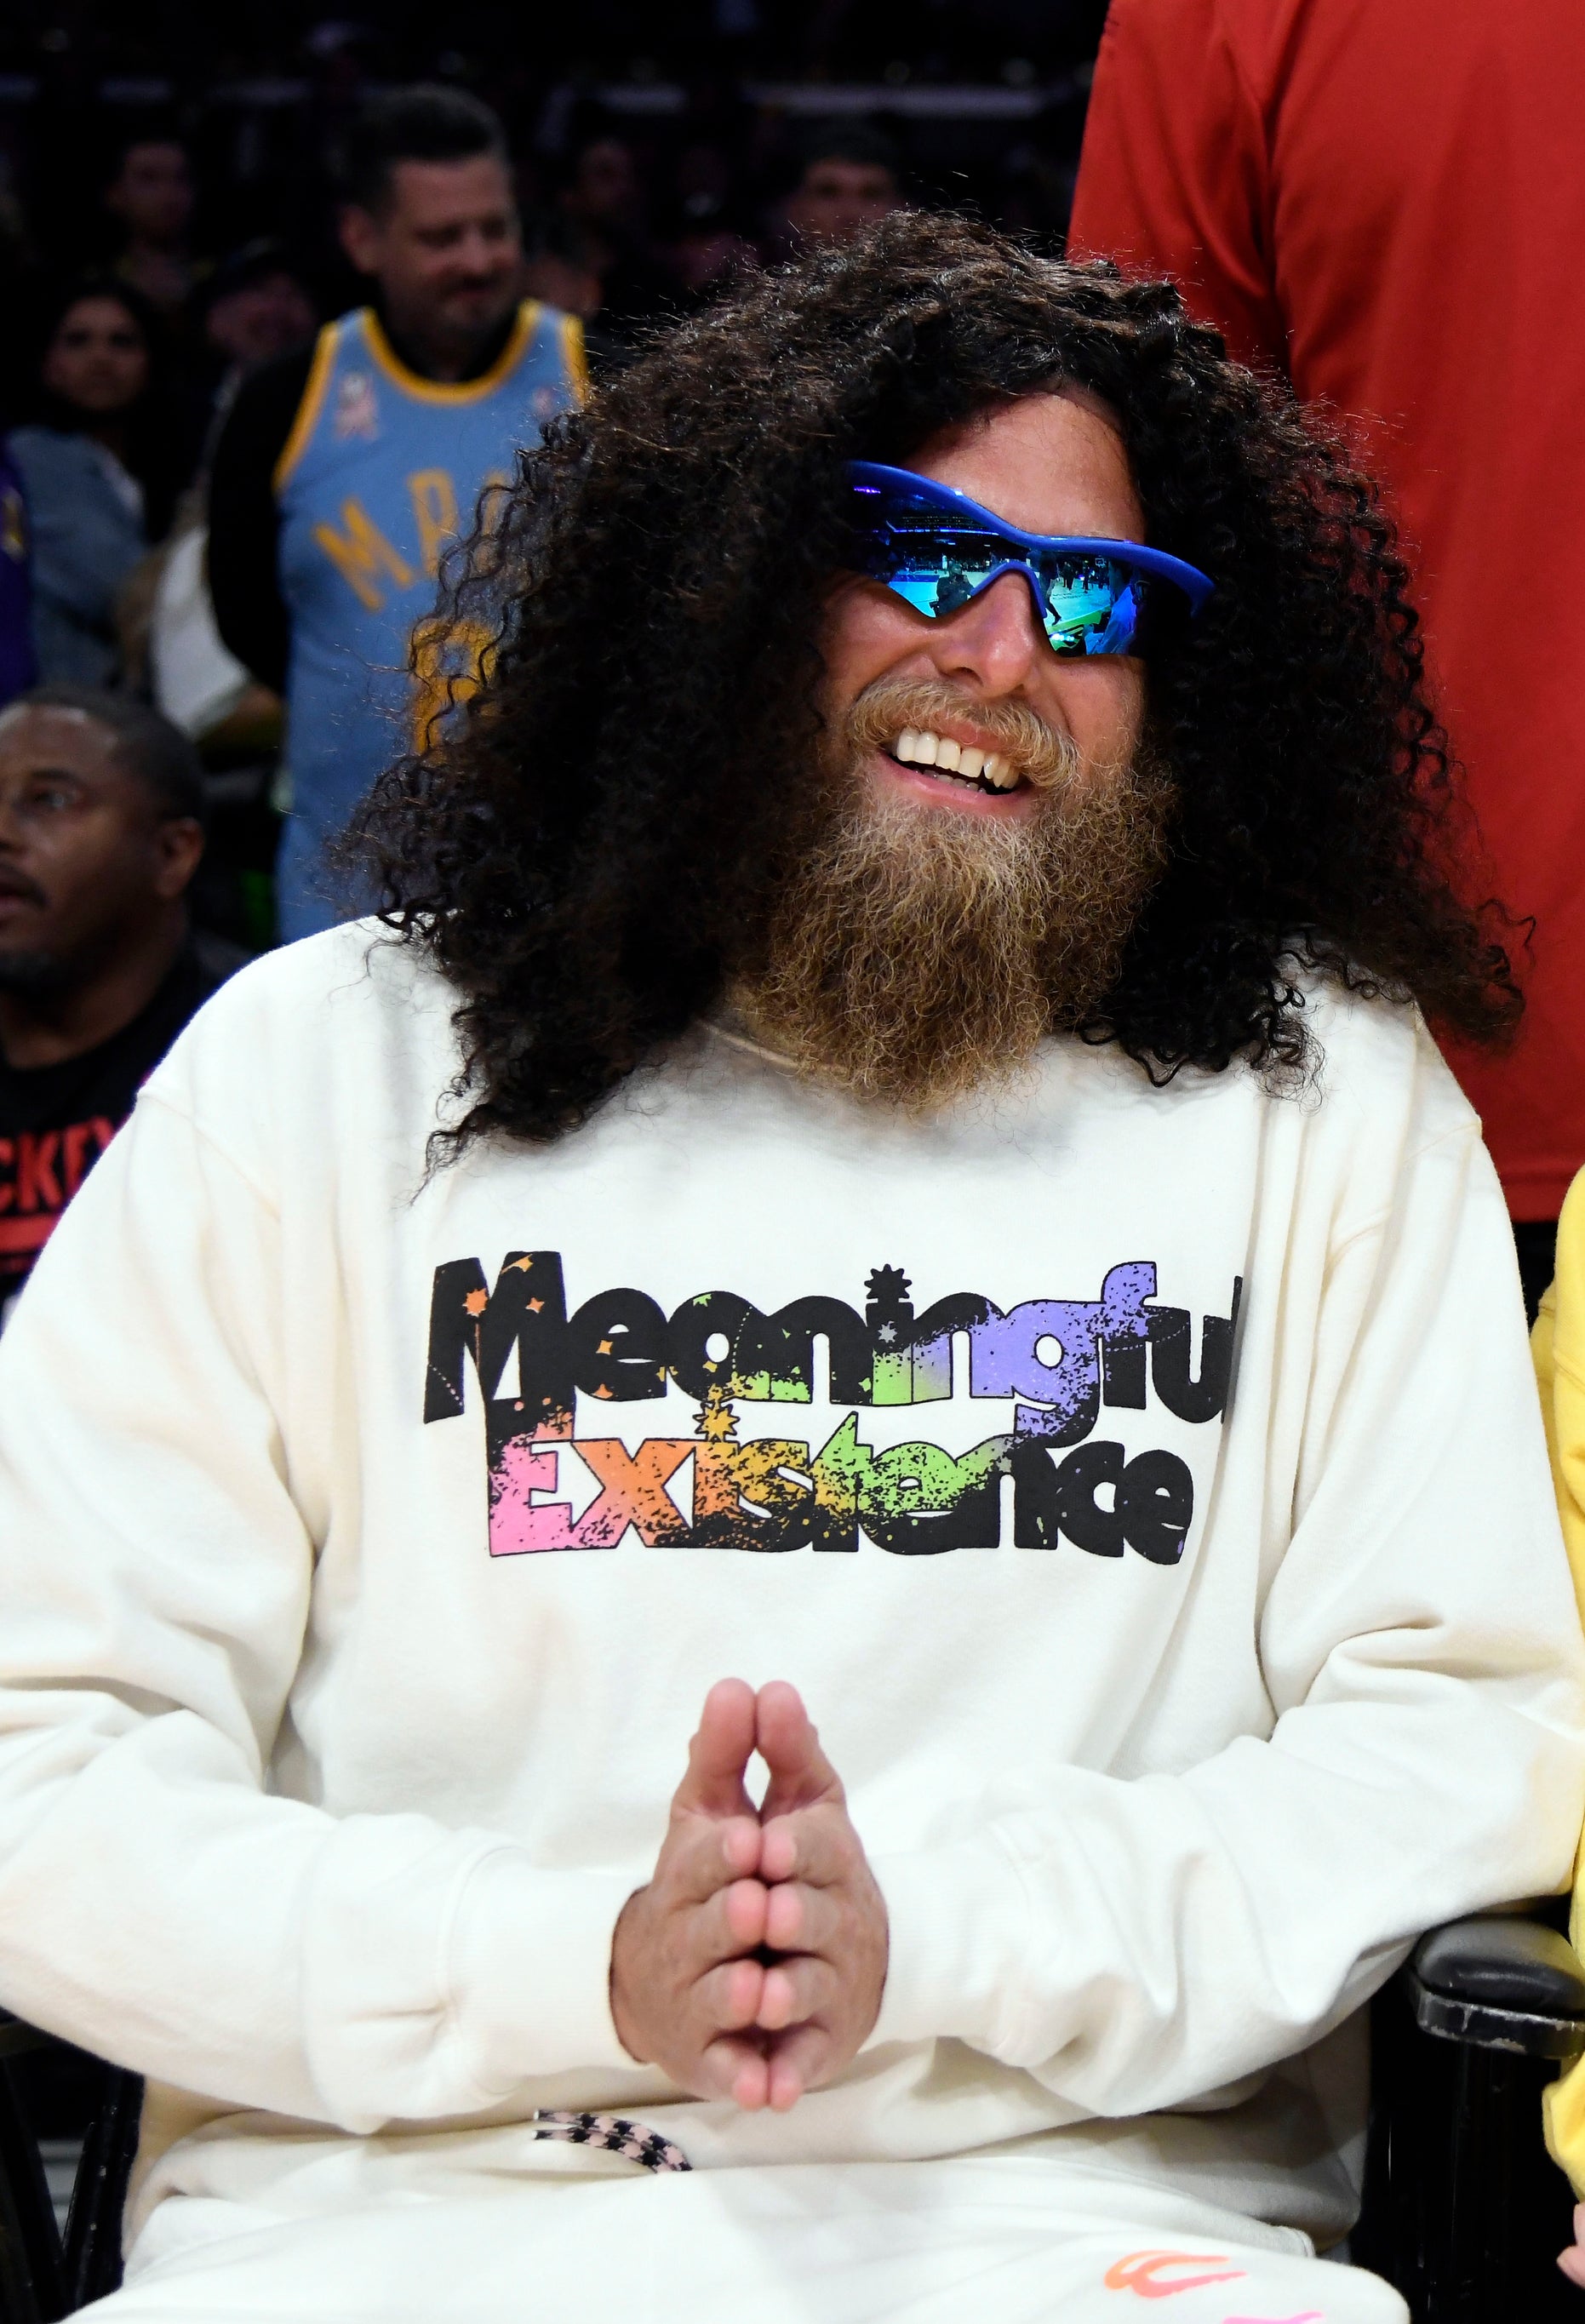 Close-up of Jonah wearing a long wig and sunglasses and a &quot;Meaningful Existence&quot; T-shirt